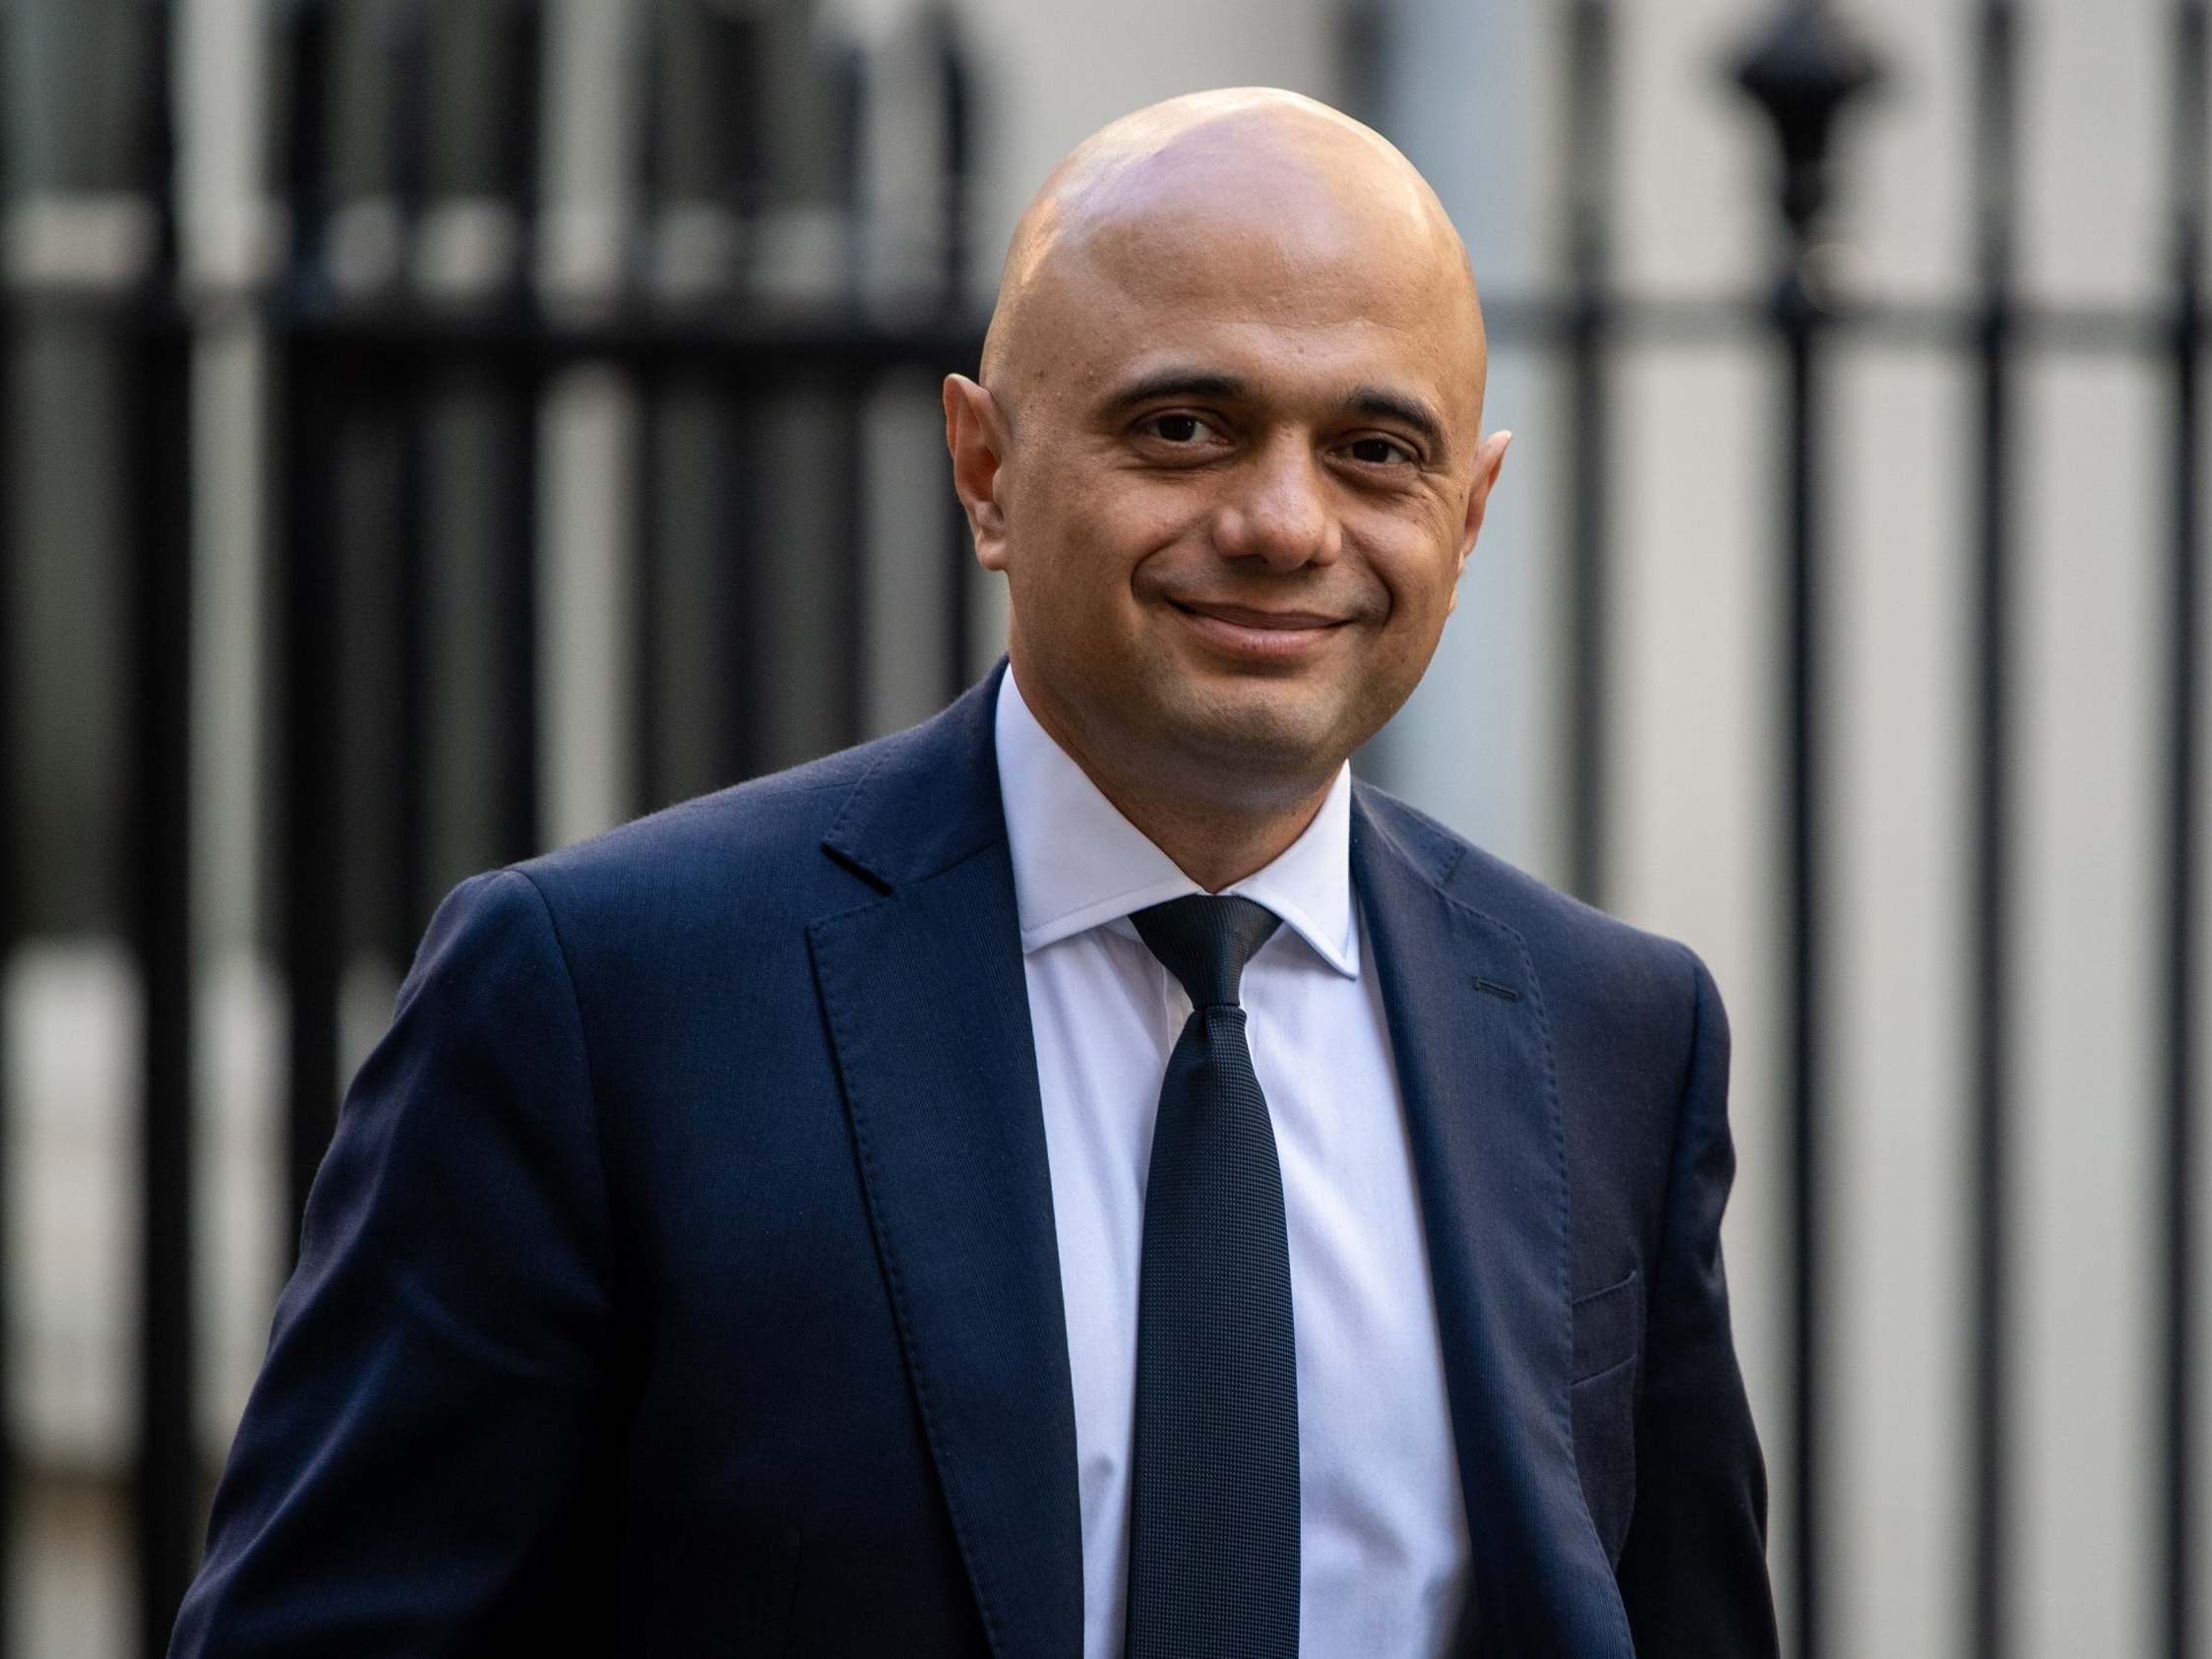 Sajid Javid must commit to doubling climate change spending, say top charities